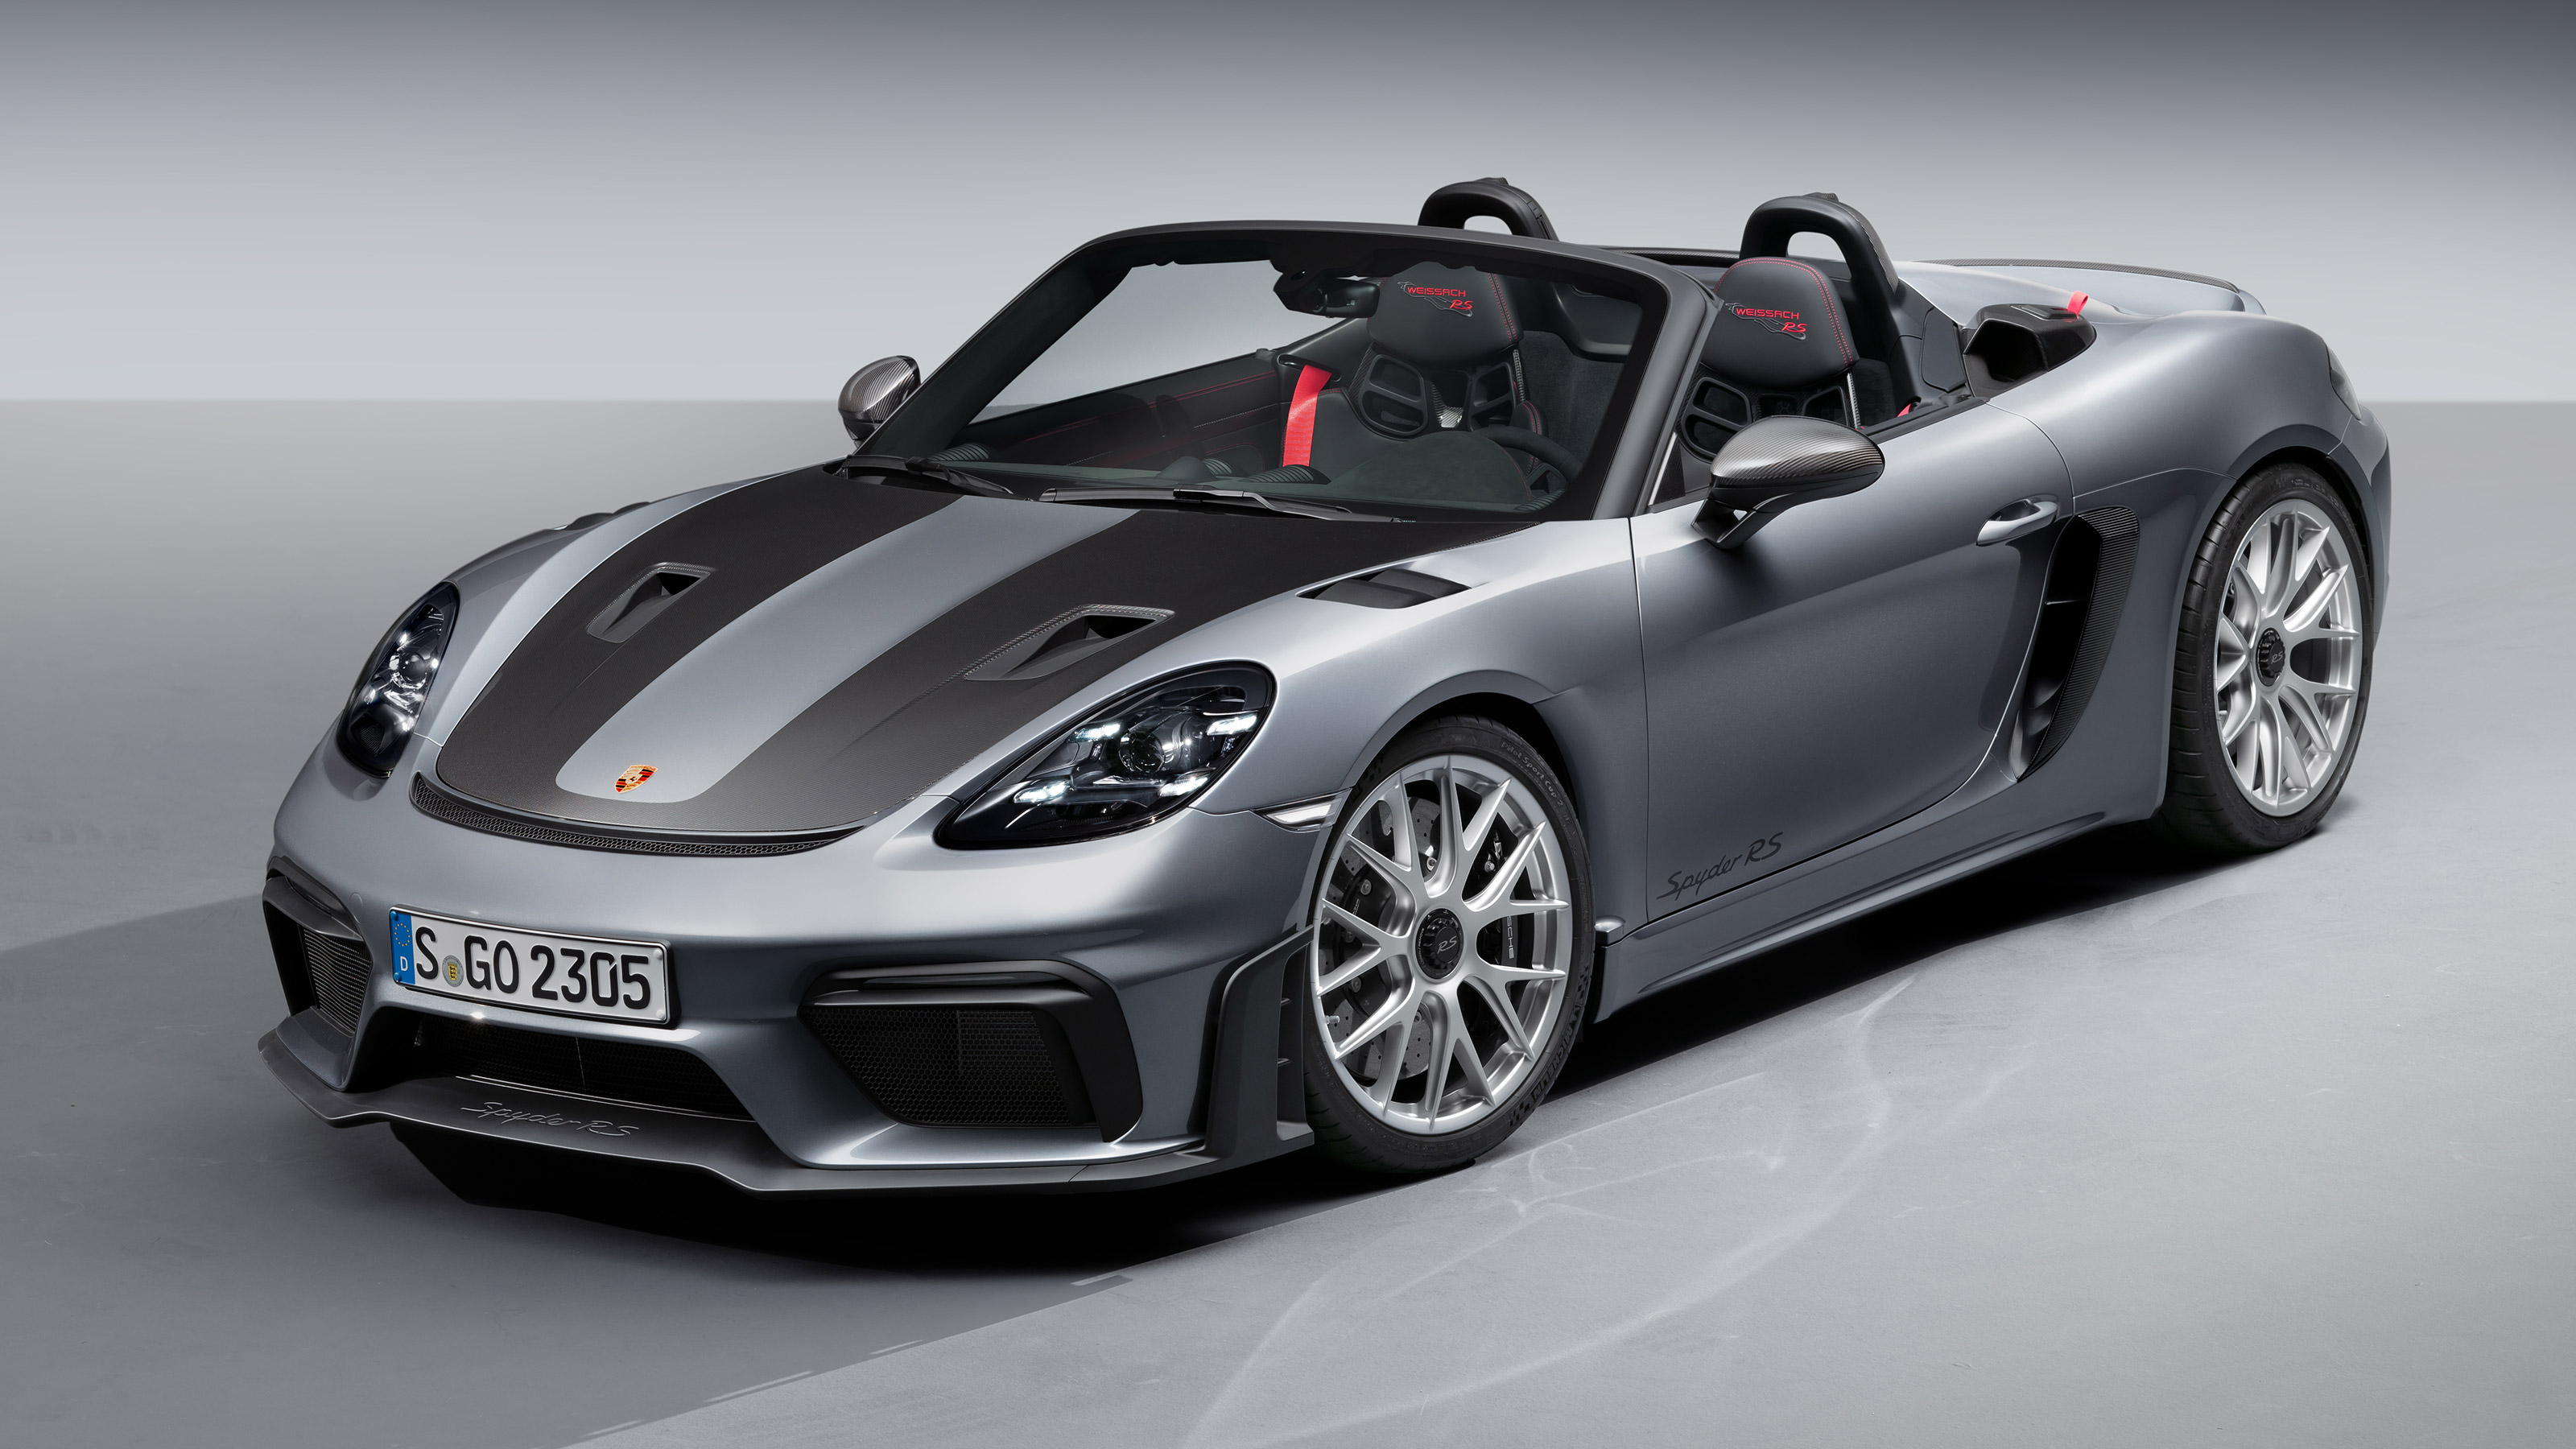 Porsche Boxster Spyder review - prices, specs and 0-60 time